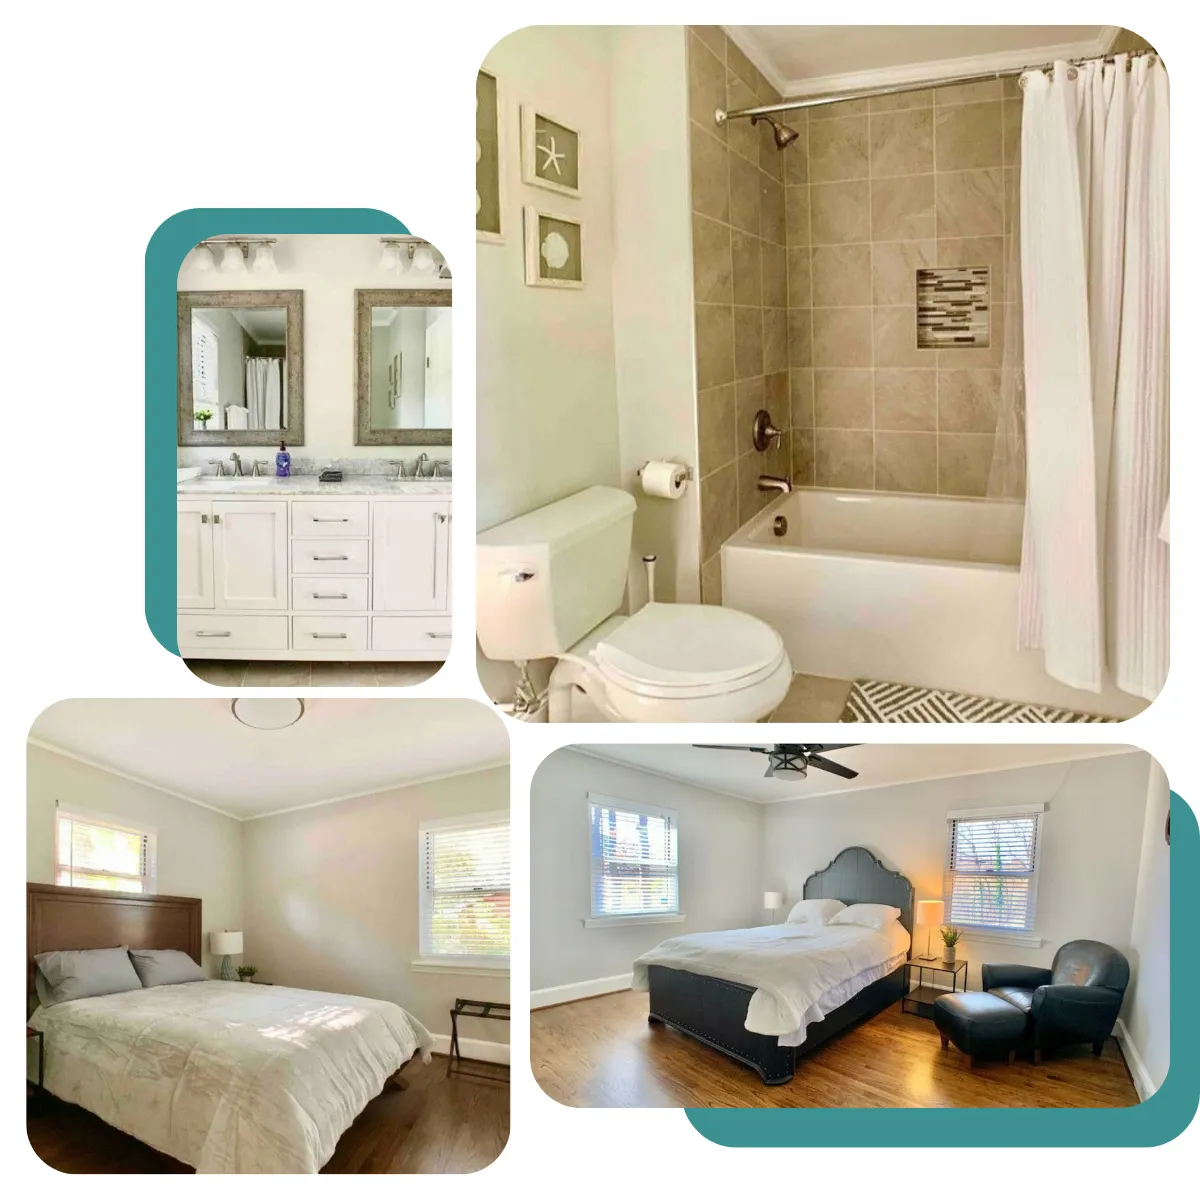 Get comfy with cozy bedding, storage, and a modern bathroom with all you need at Cozy Orchard Stay.